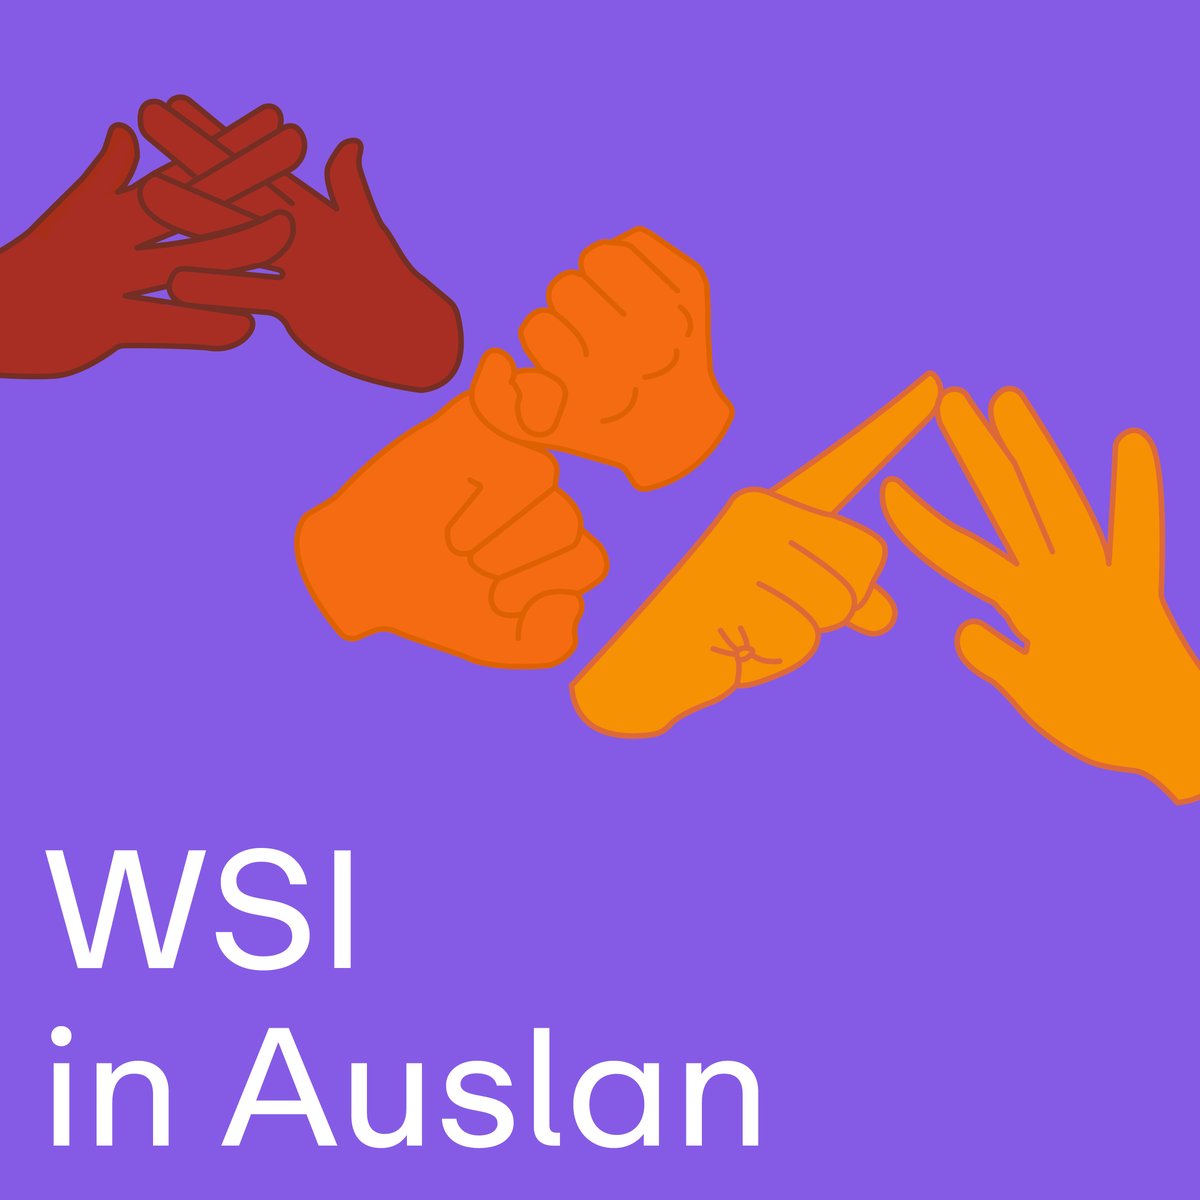 We are inviting members of the deaf community to an Auslan-friendly information session at the WSI Experience Centre on 19th May at 12pm-1pm. Secure your spot here: trybooking.com/CQMRM